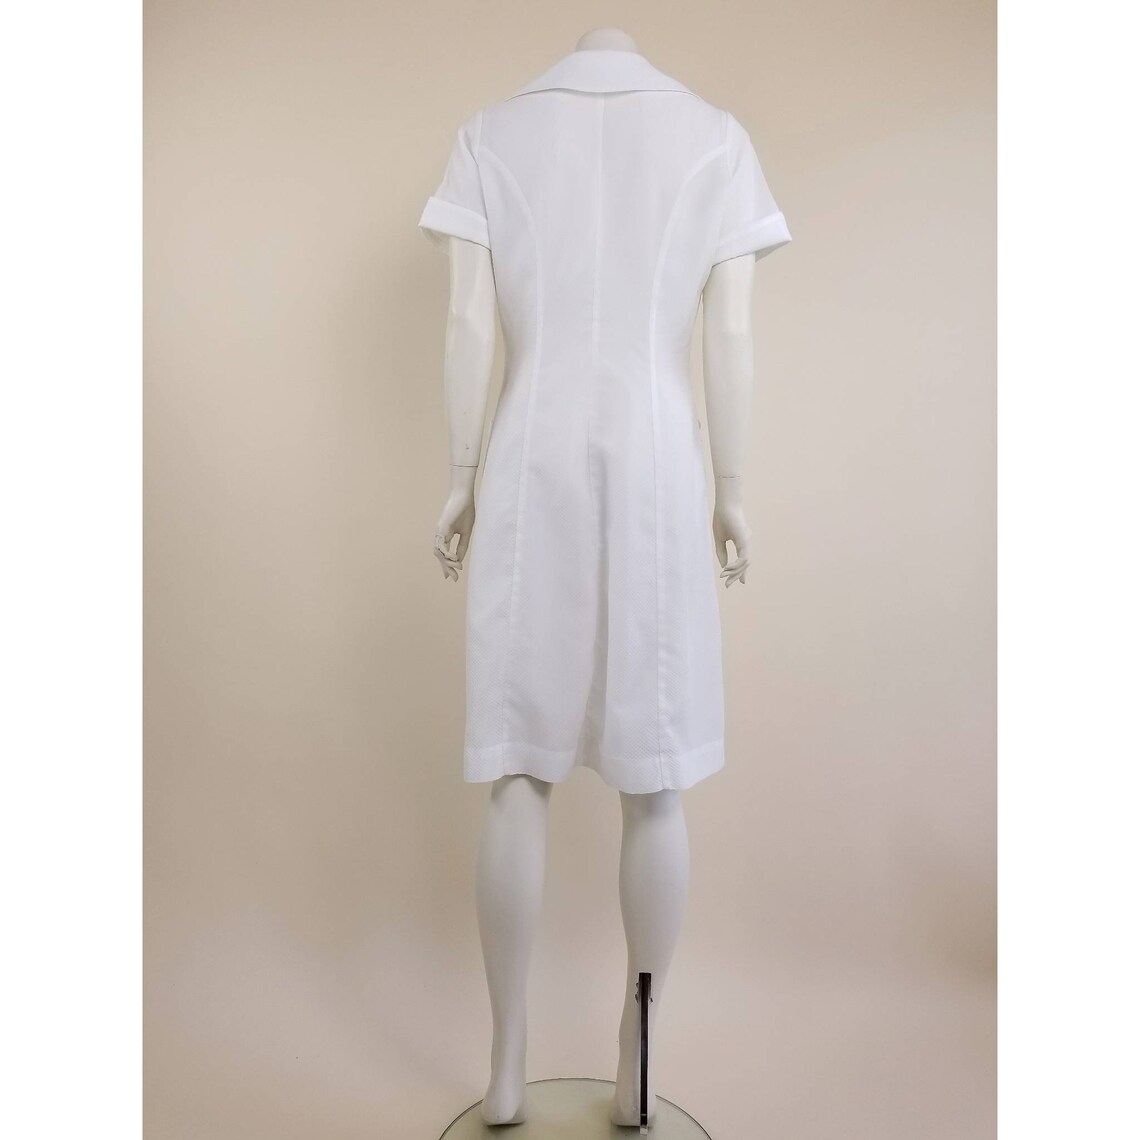 60s/70s unbranded white lightweight sheer nurse dress with | Etsy